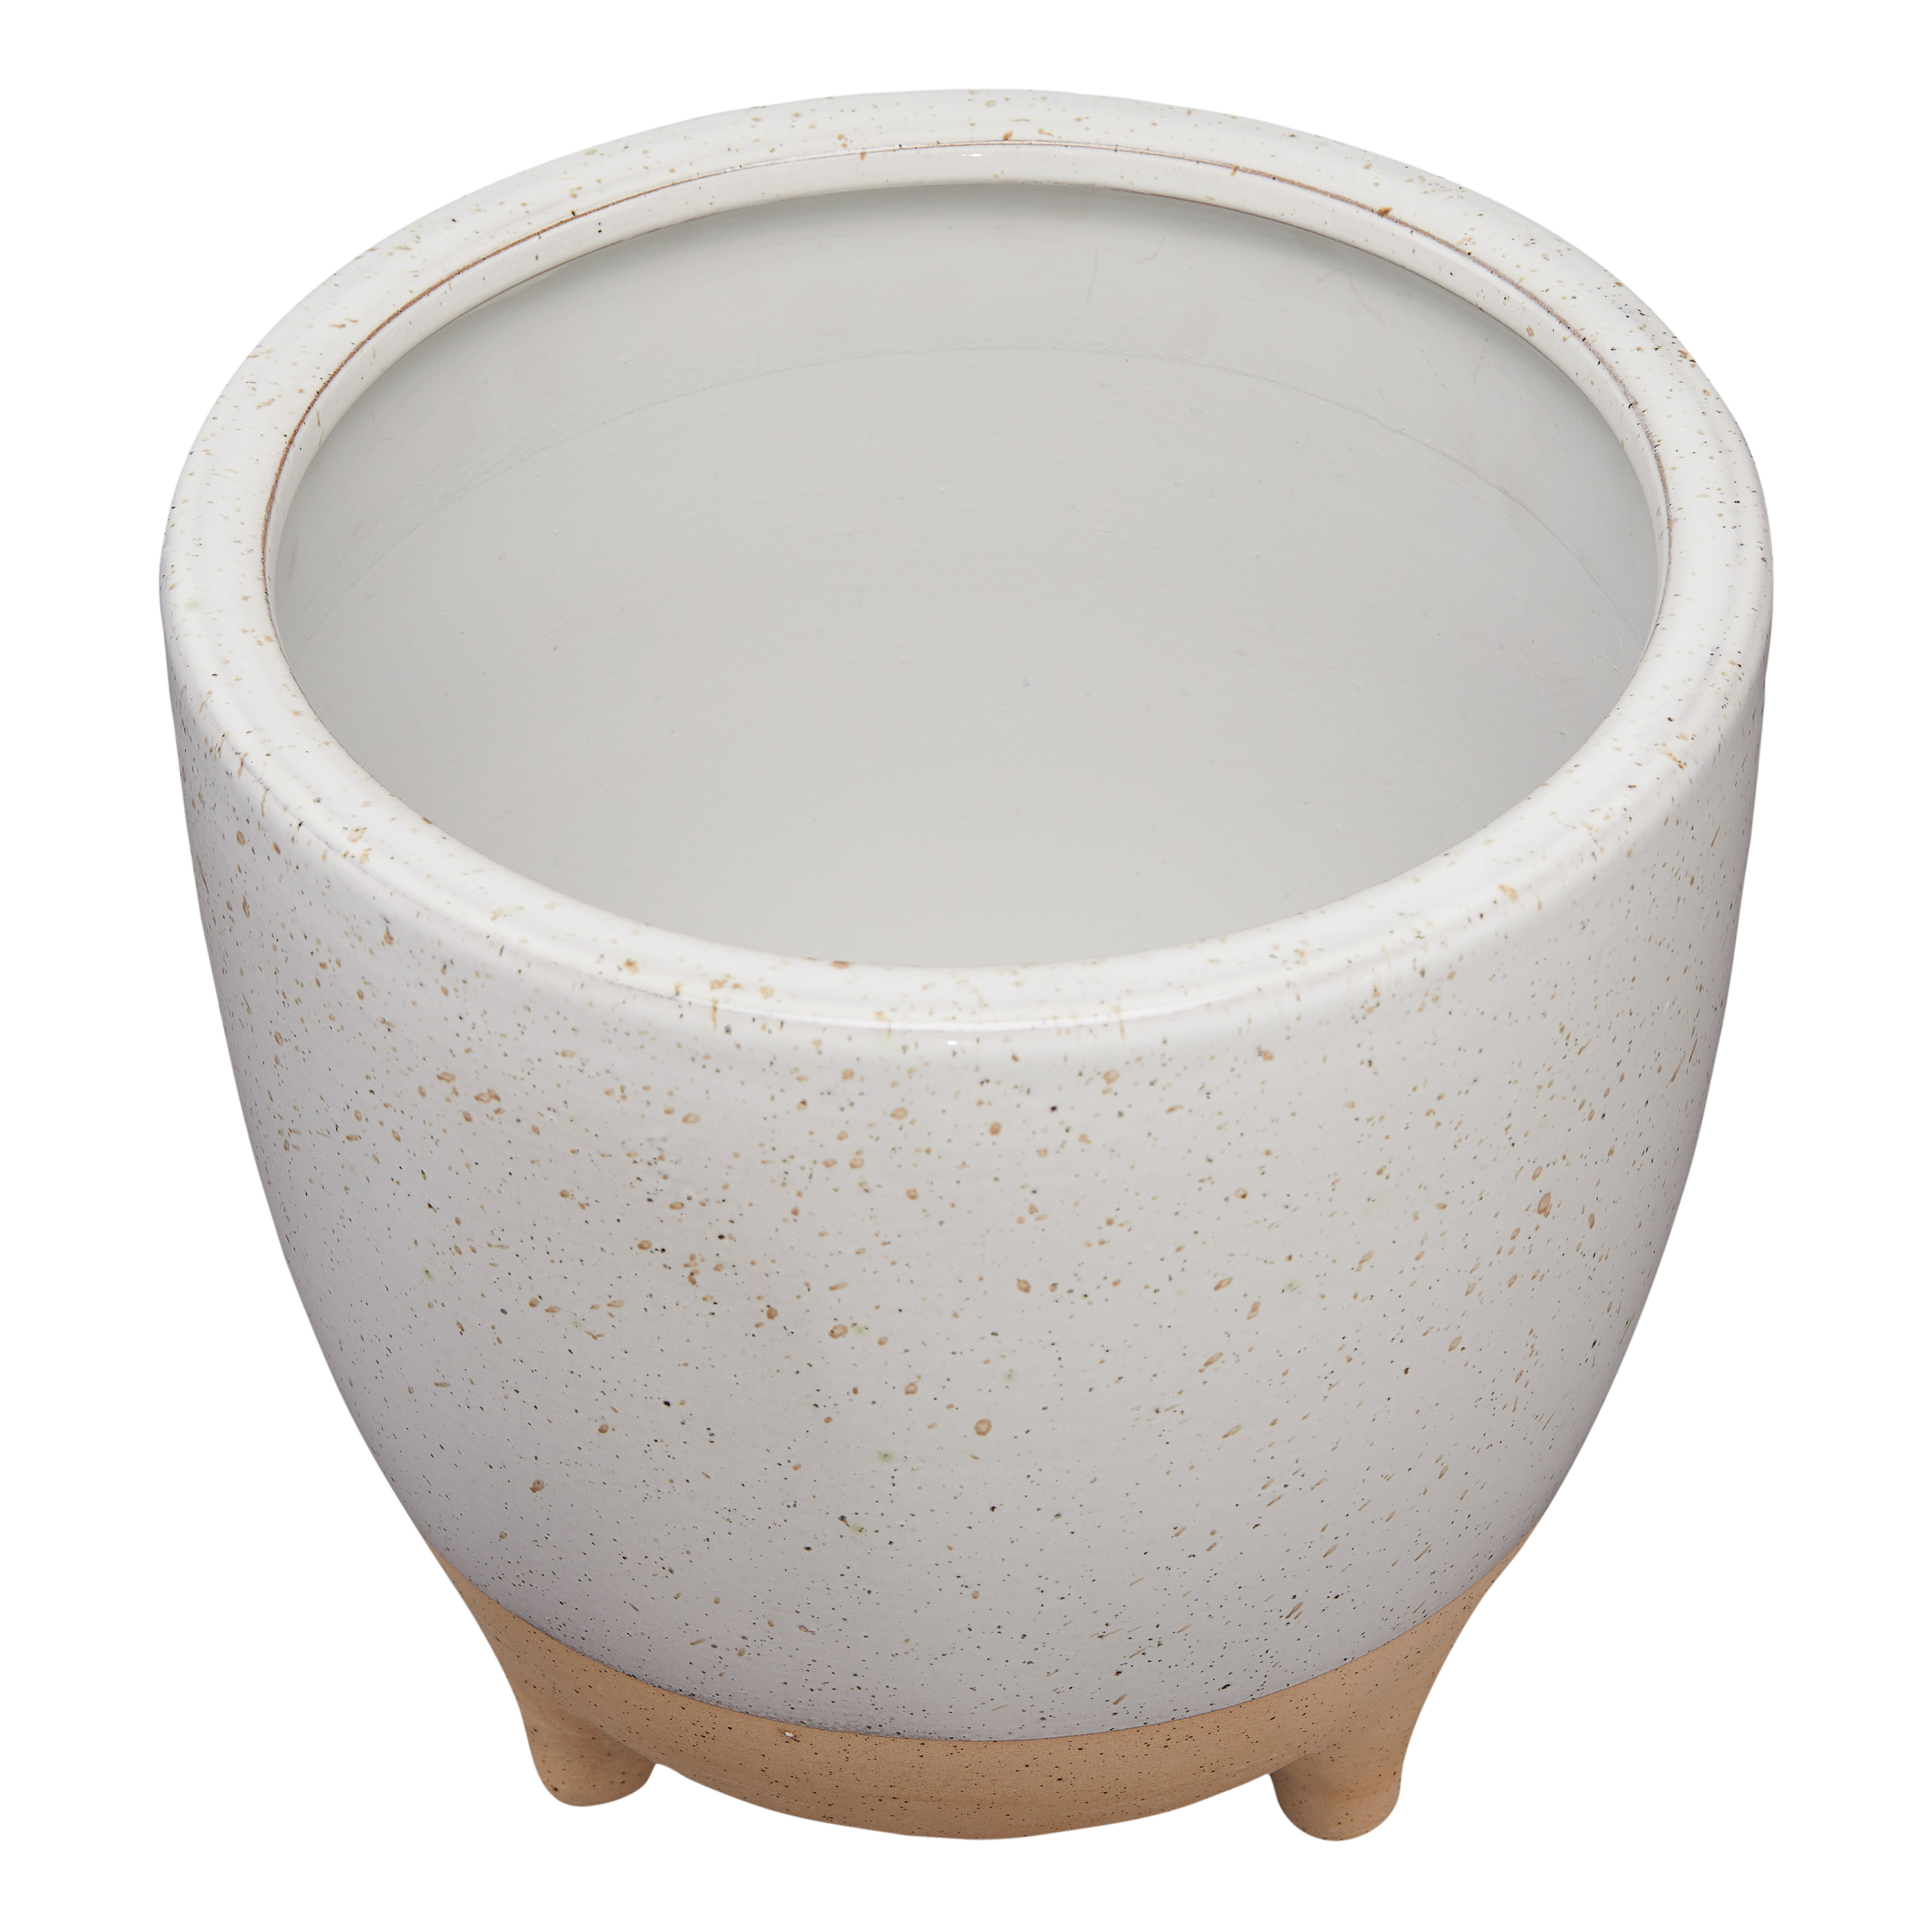 Better Homes & Gardens 10" x 10" x 9" Round White and Beige Ceramic Plant Planter - image 3 of 4